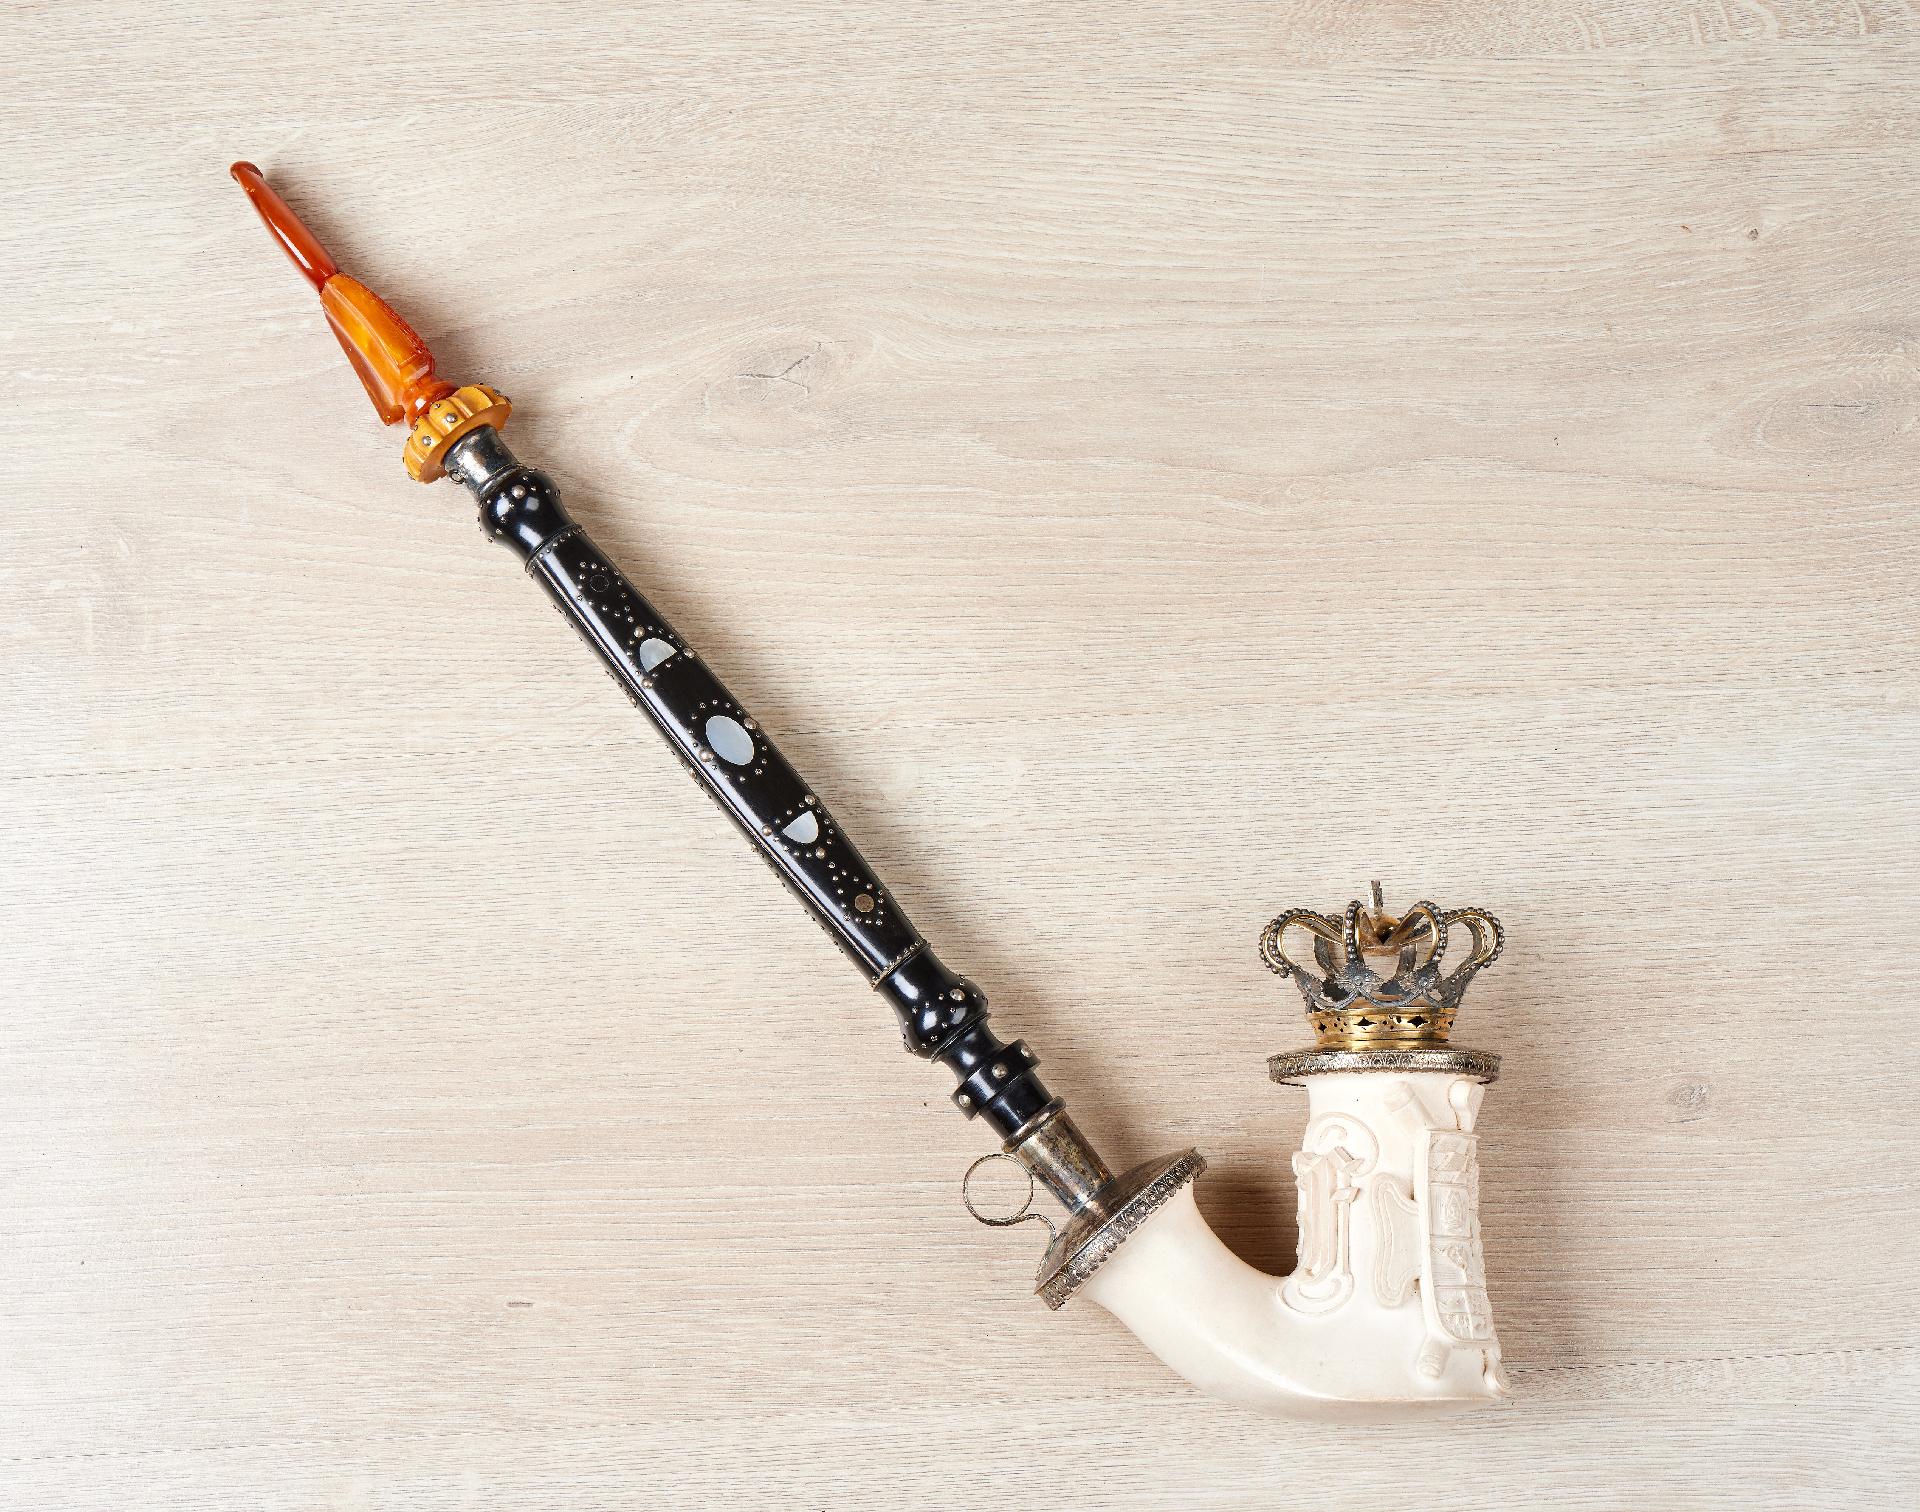 Württemberg : An important meerschaum pipe from the Württemberg royal family. - Image 4 of 9